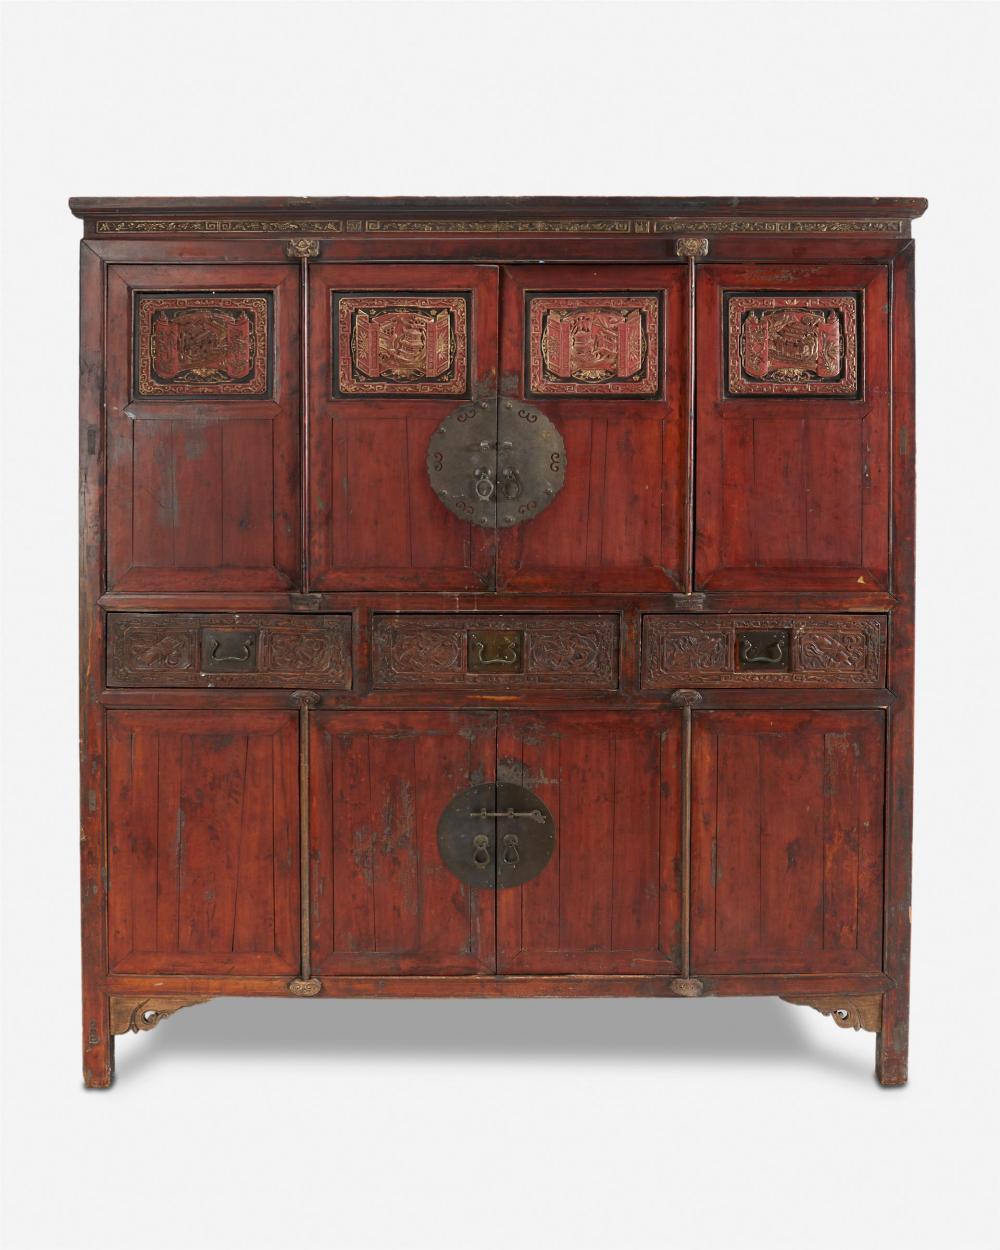 A CHINESE CARVED WOOD CABINETA